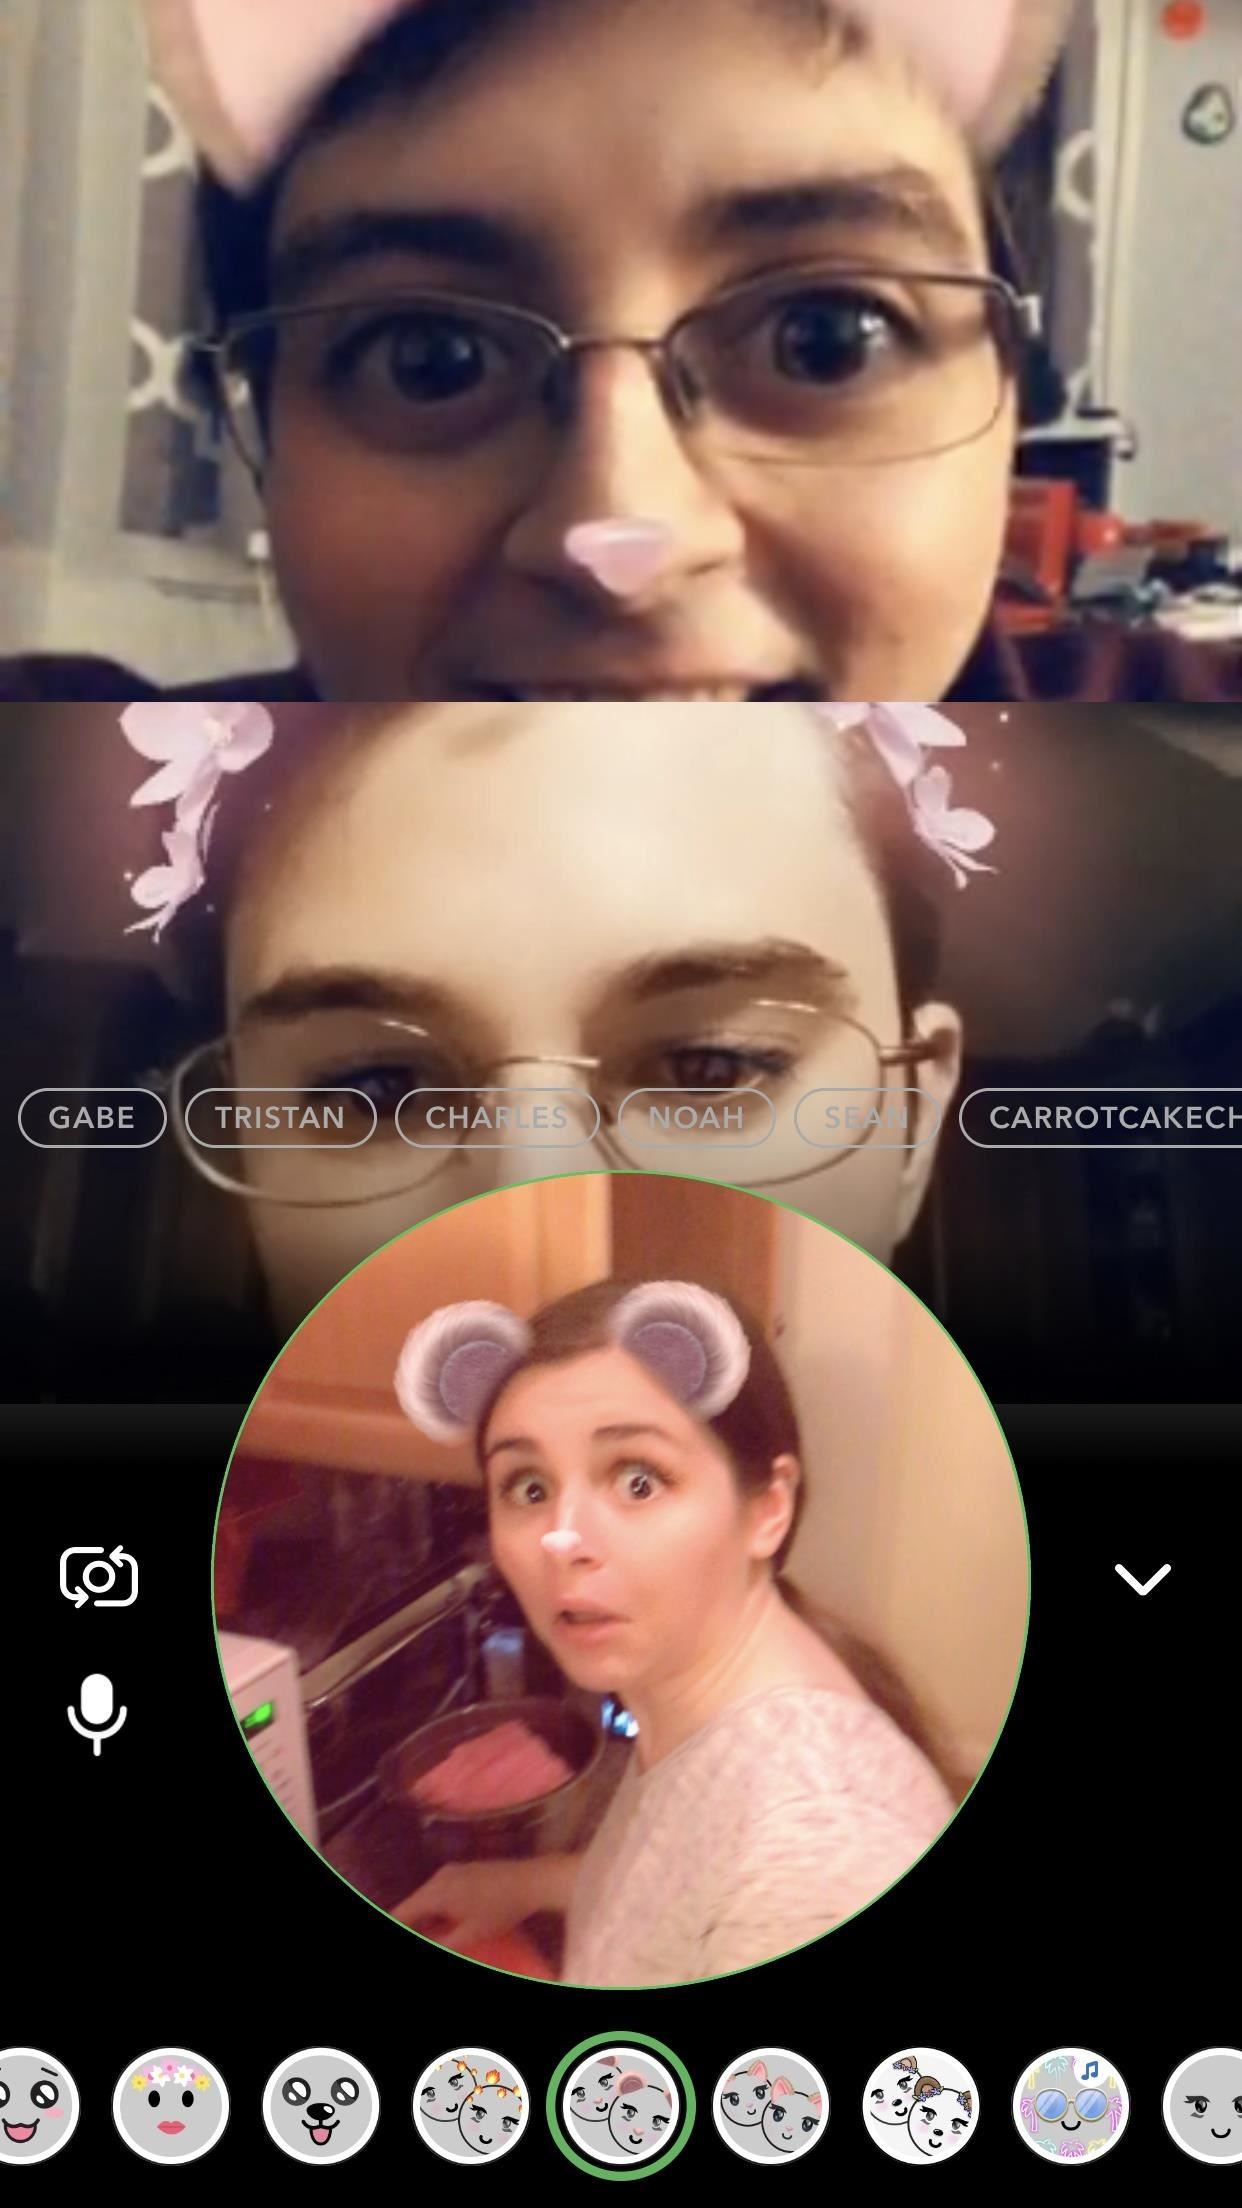 Snapchat 101: How to Audio & Video Chat with Multiple Users at the Same Time in Groups